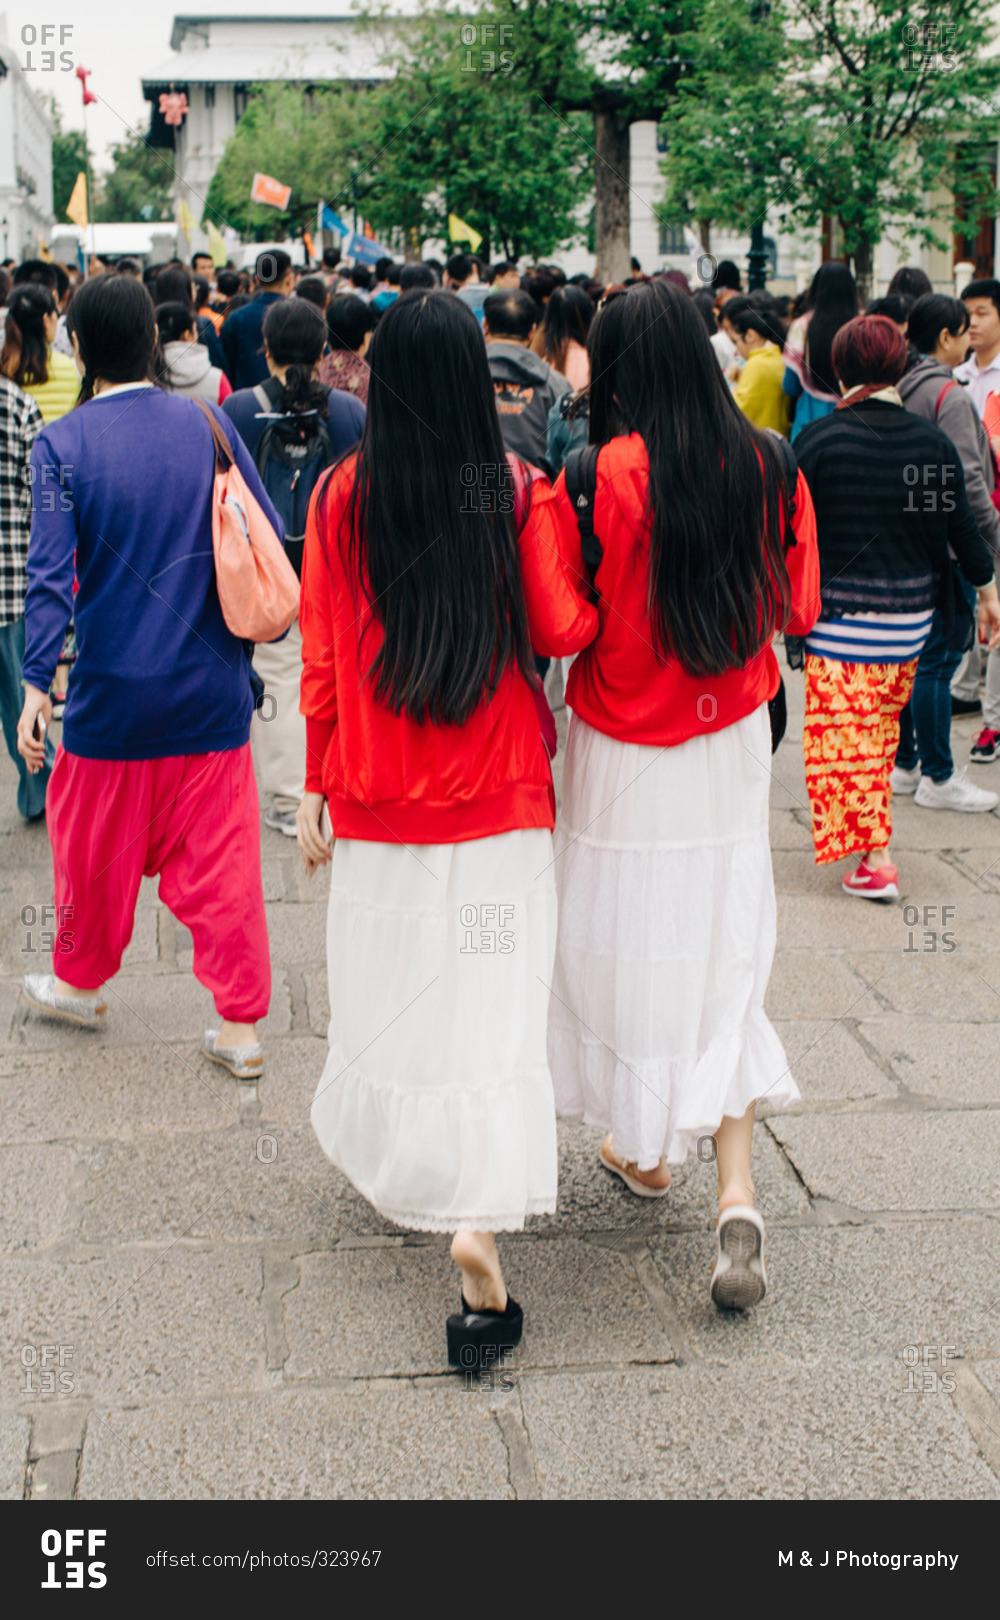 Two women walking through a crowd in the same outfit